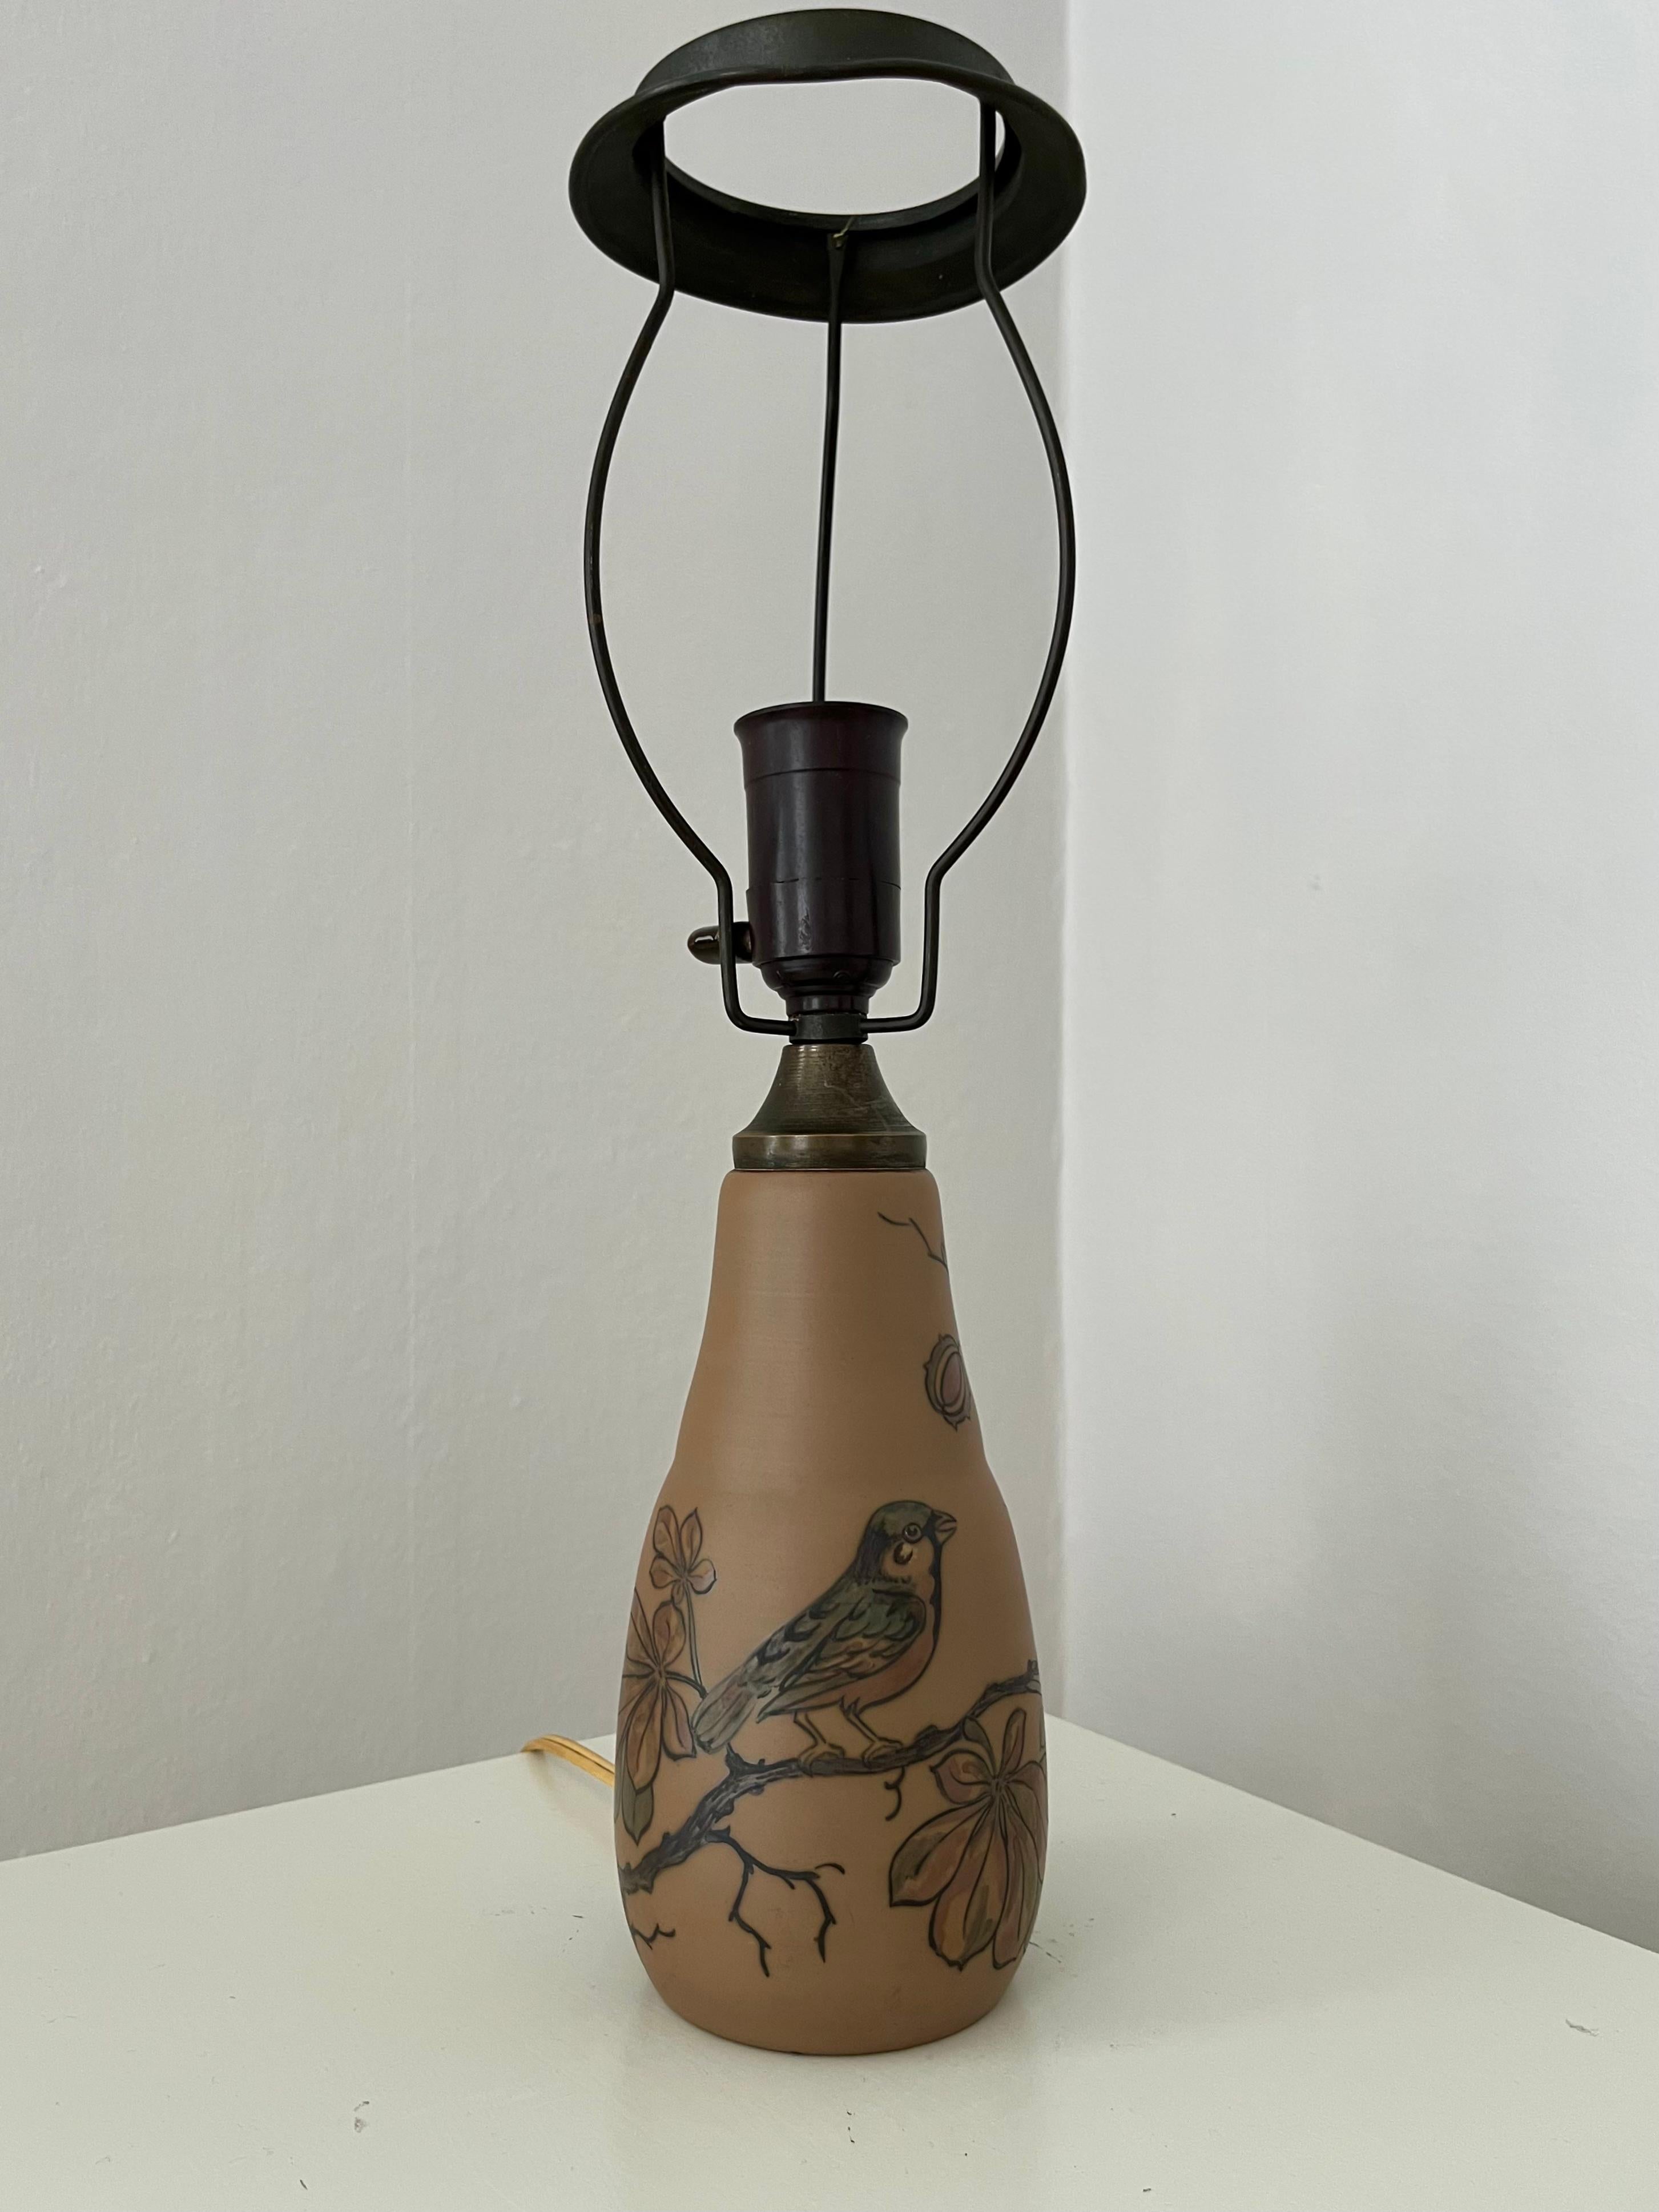 This Art nouveau Danish ceramic smaller table lamp is hand decorated, made by L. Hjort ceramic factory on Danish island Bornholm that is famous for it's outstanding ceramic workshops. Hand decorated with a bird sitting on a branch and leaves in